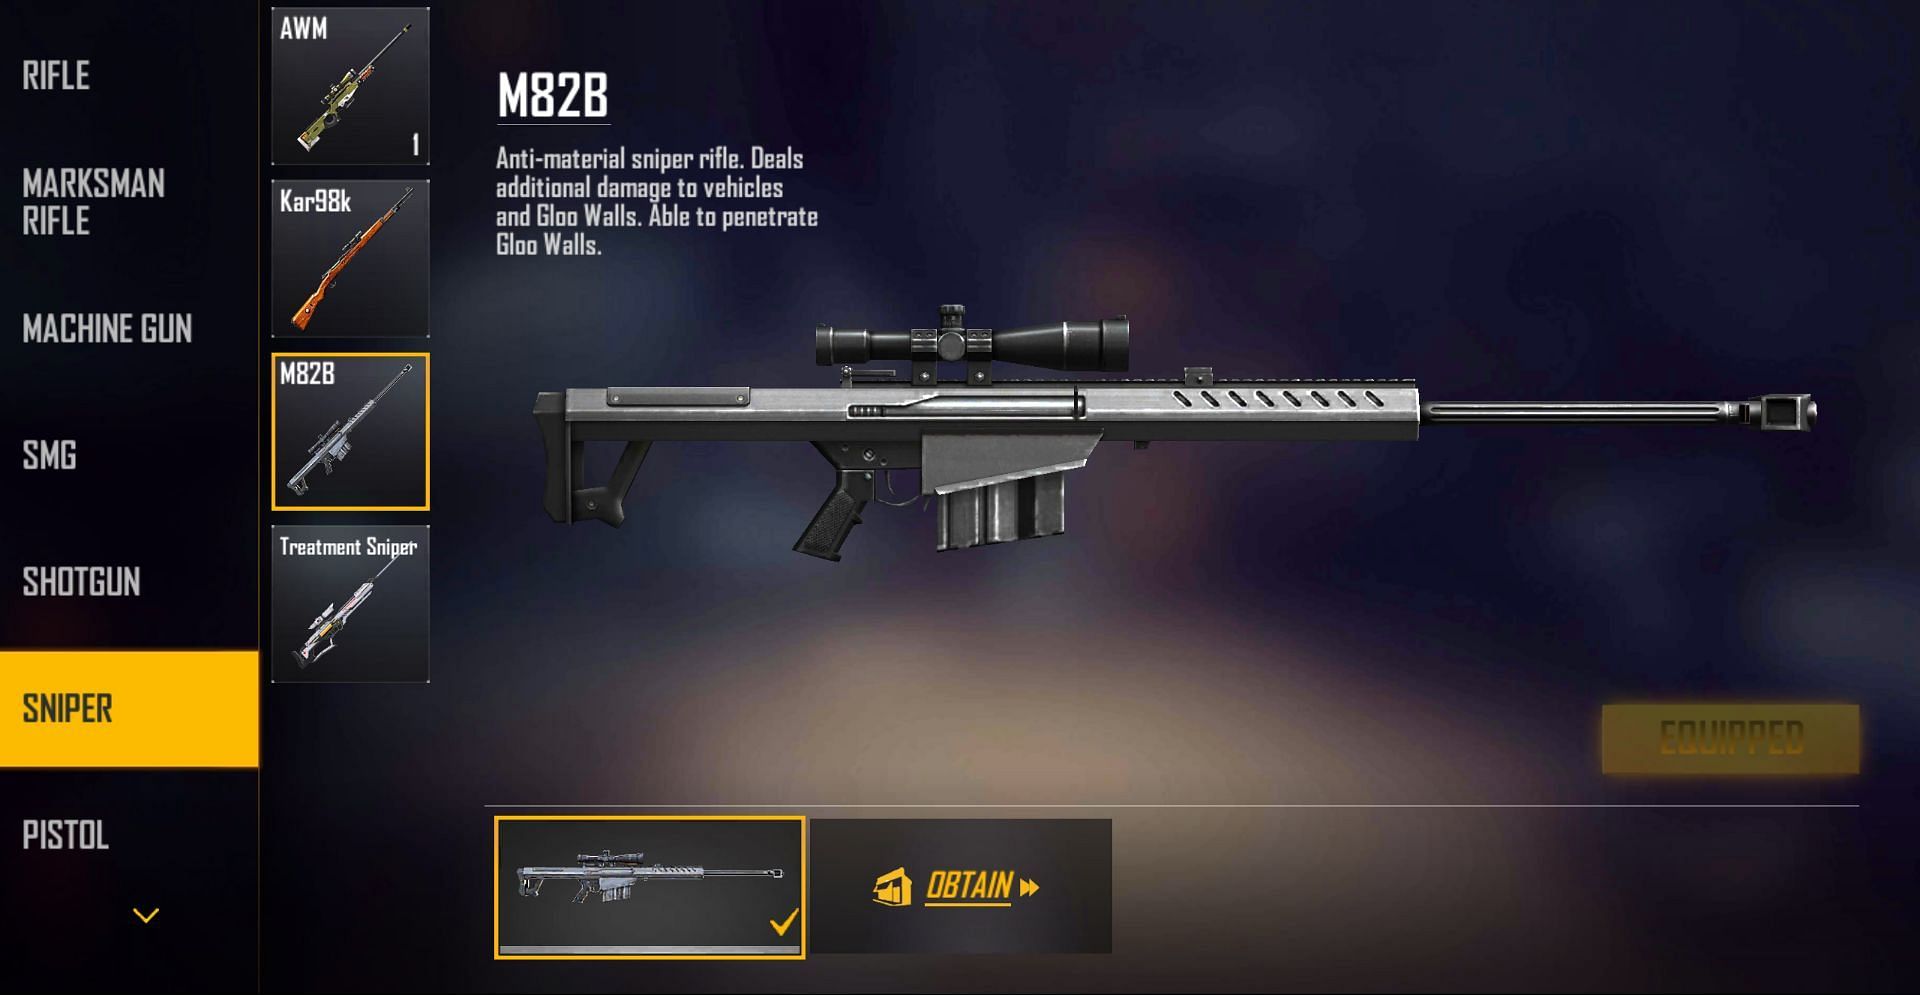 This weapon can penetrate through Gloo Walls (Image via Free Fire)